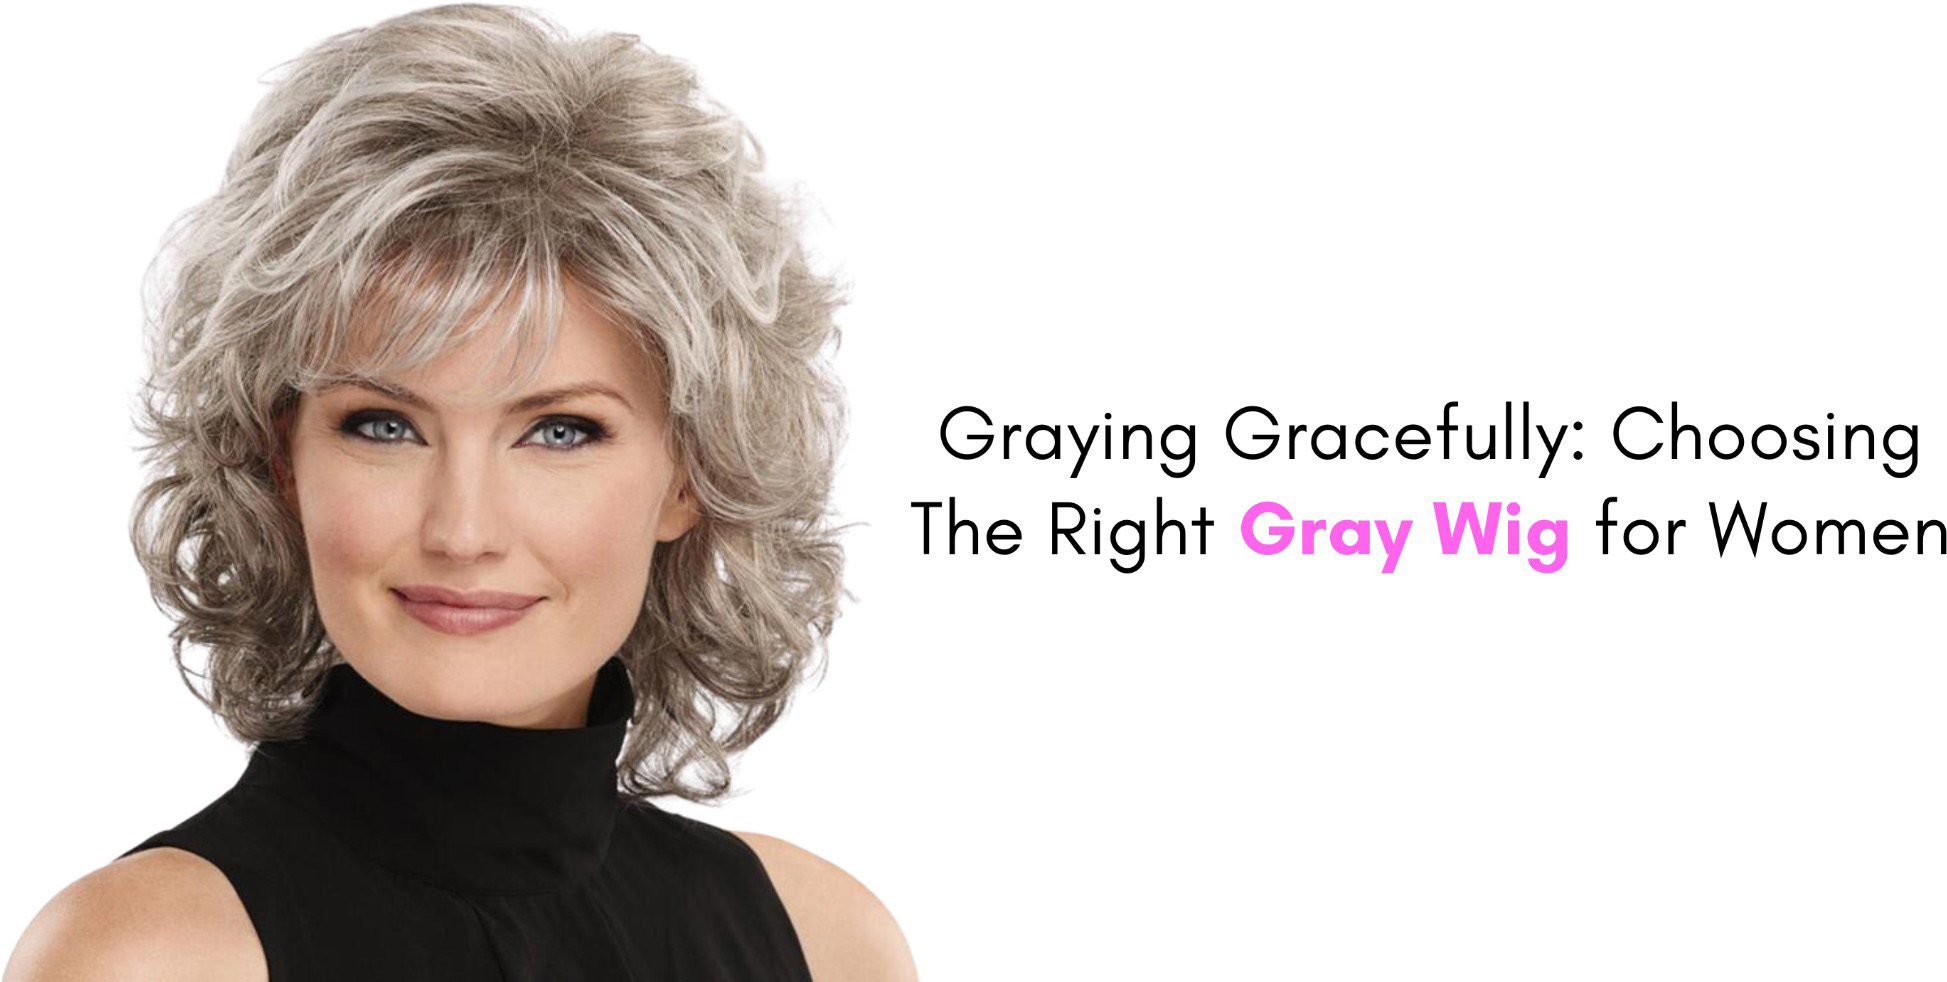 graying gracefully choosing the right gray wig for women